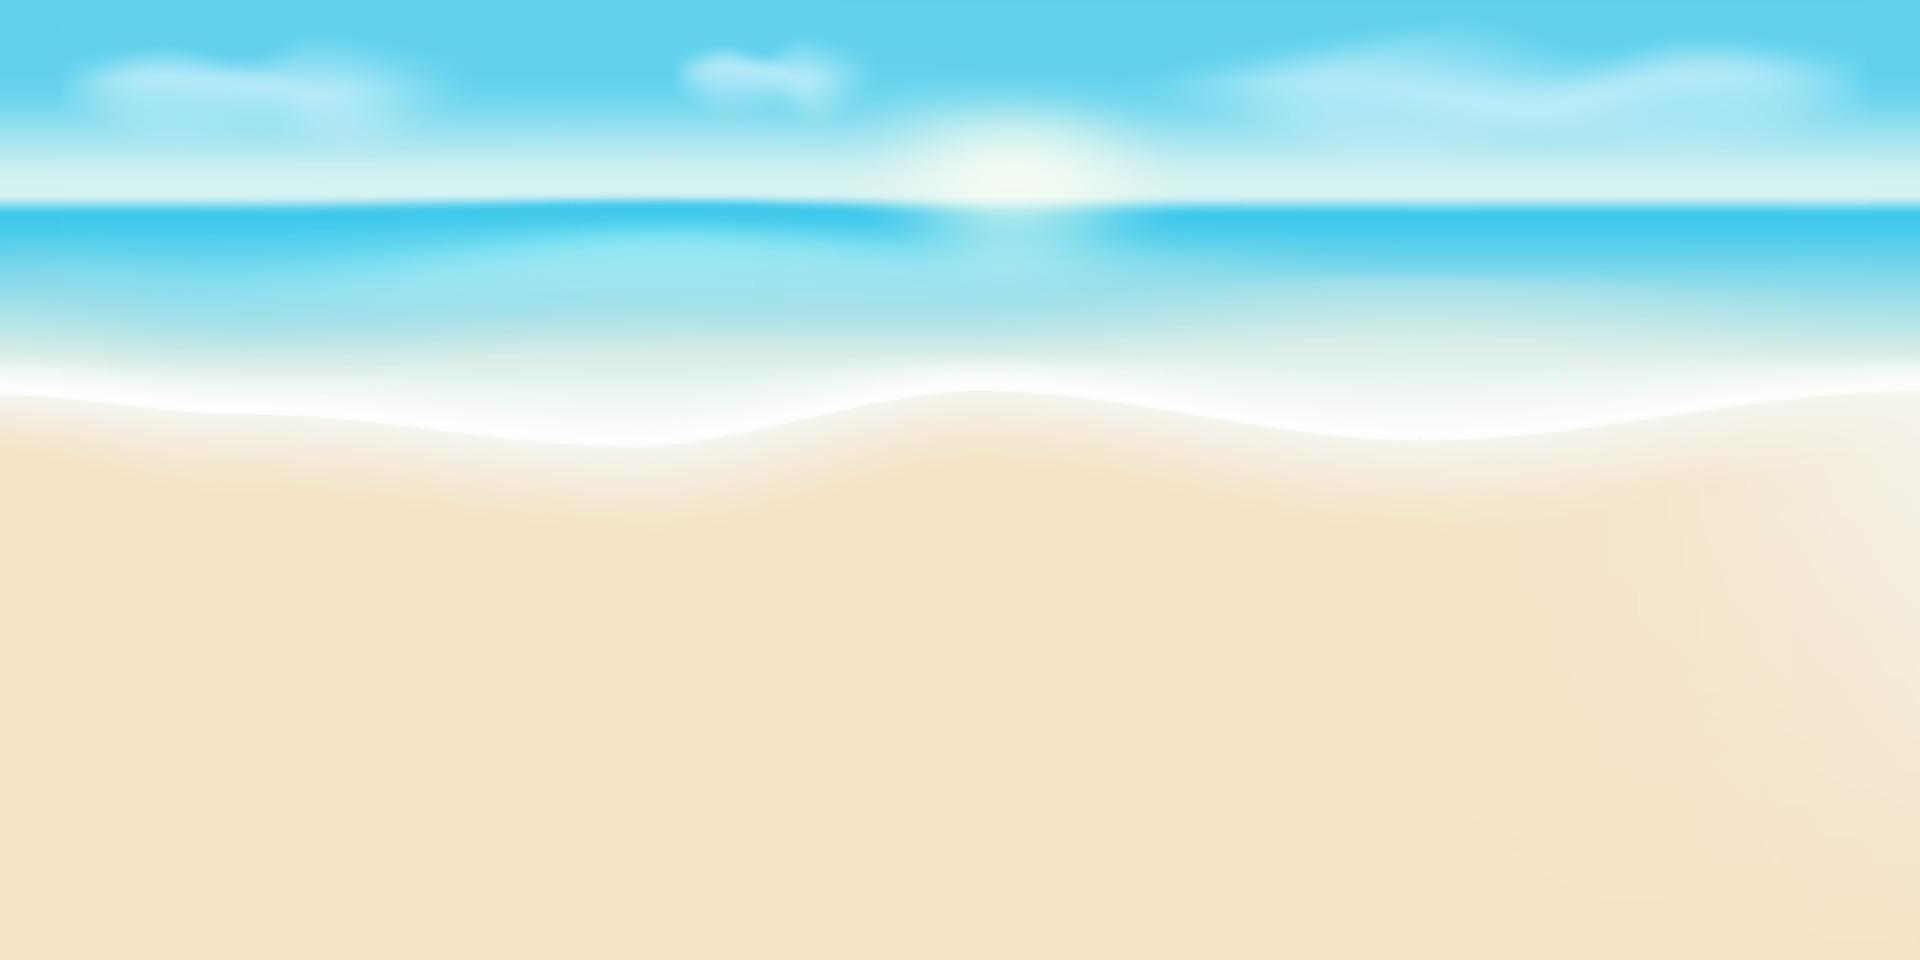 The beach with sea and sky for summer vector